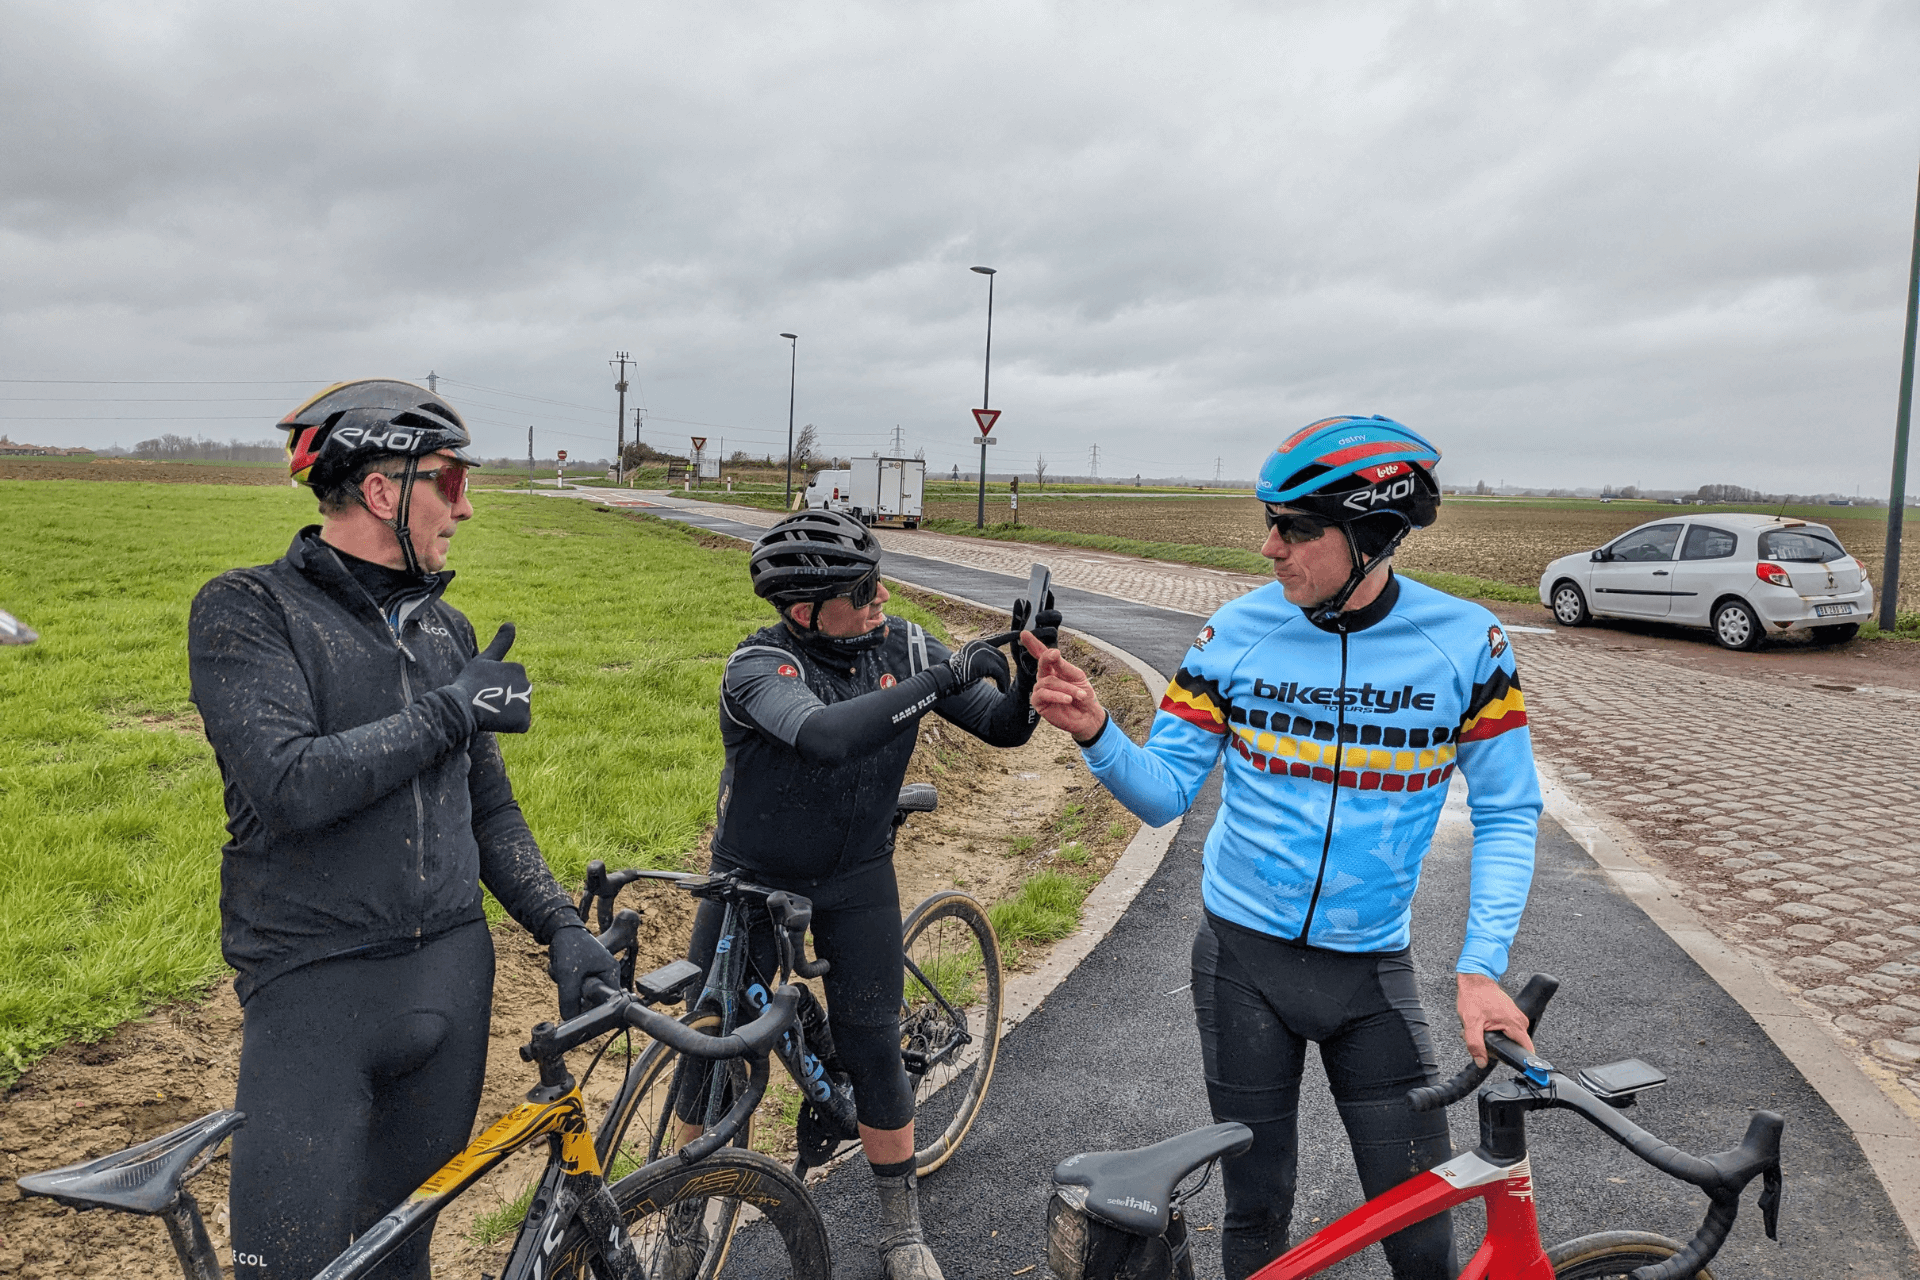 Three stationary cyclists standing on a bike path next to a motorway. They are dressed for cold weather. One is taking a selfie, the other two are engaged in conversation